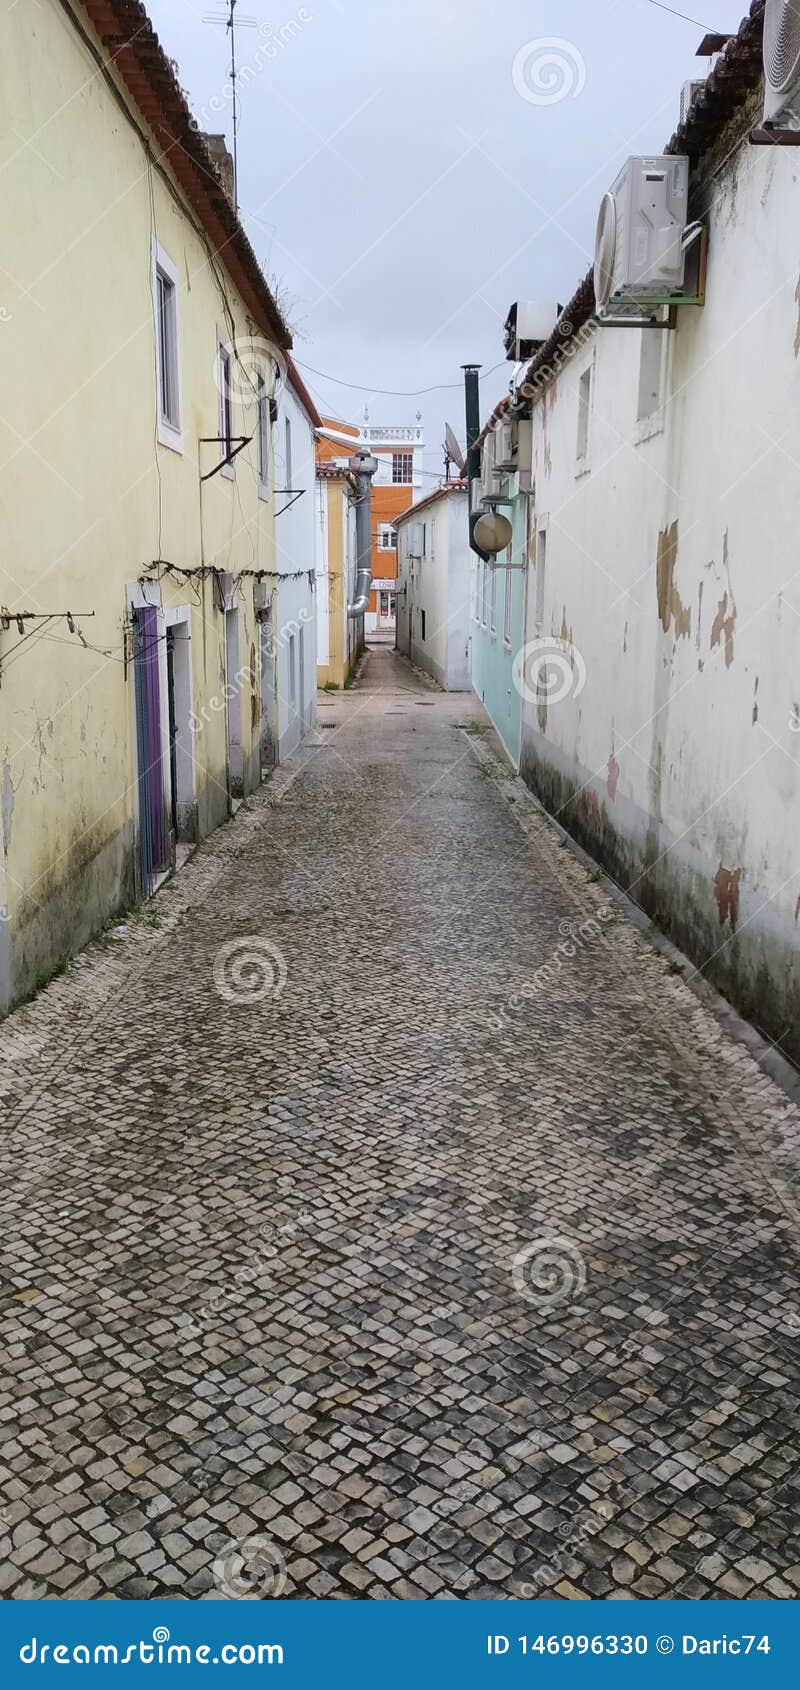 small street in loures, portugal